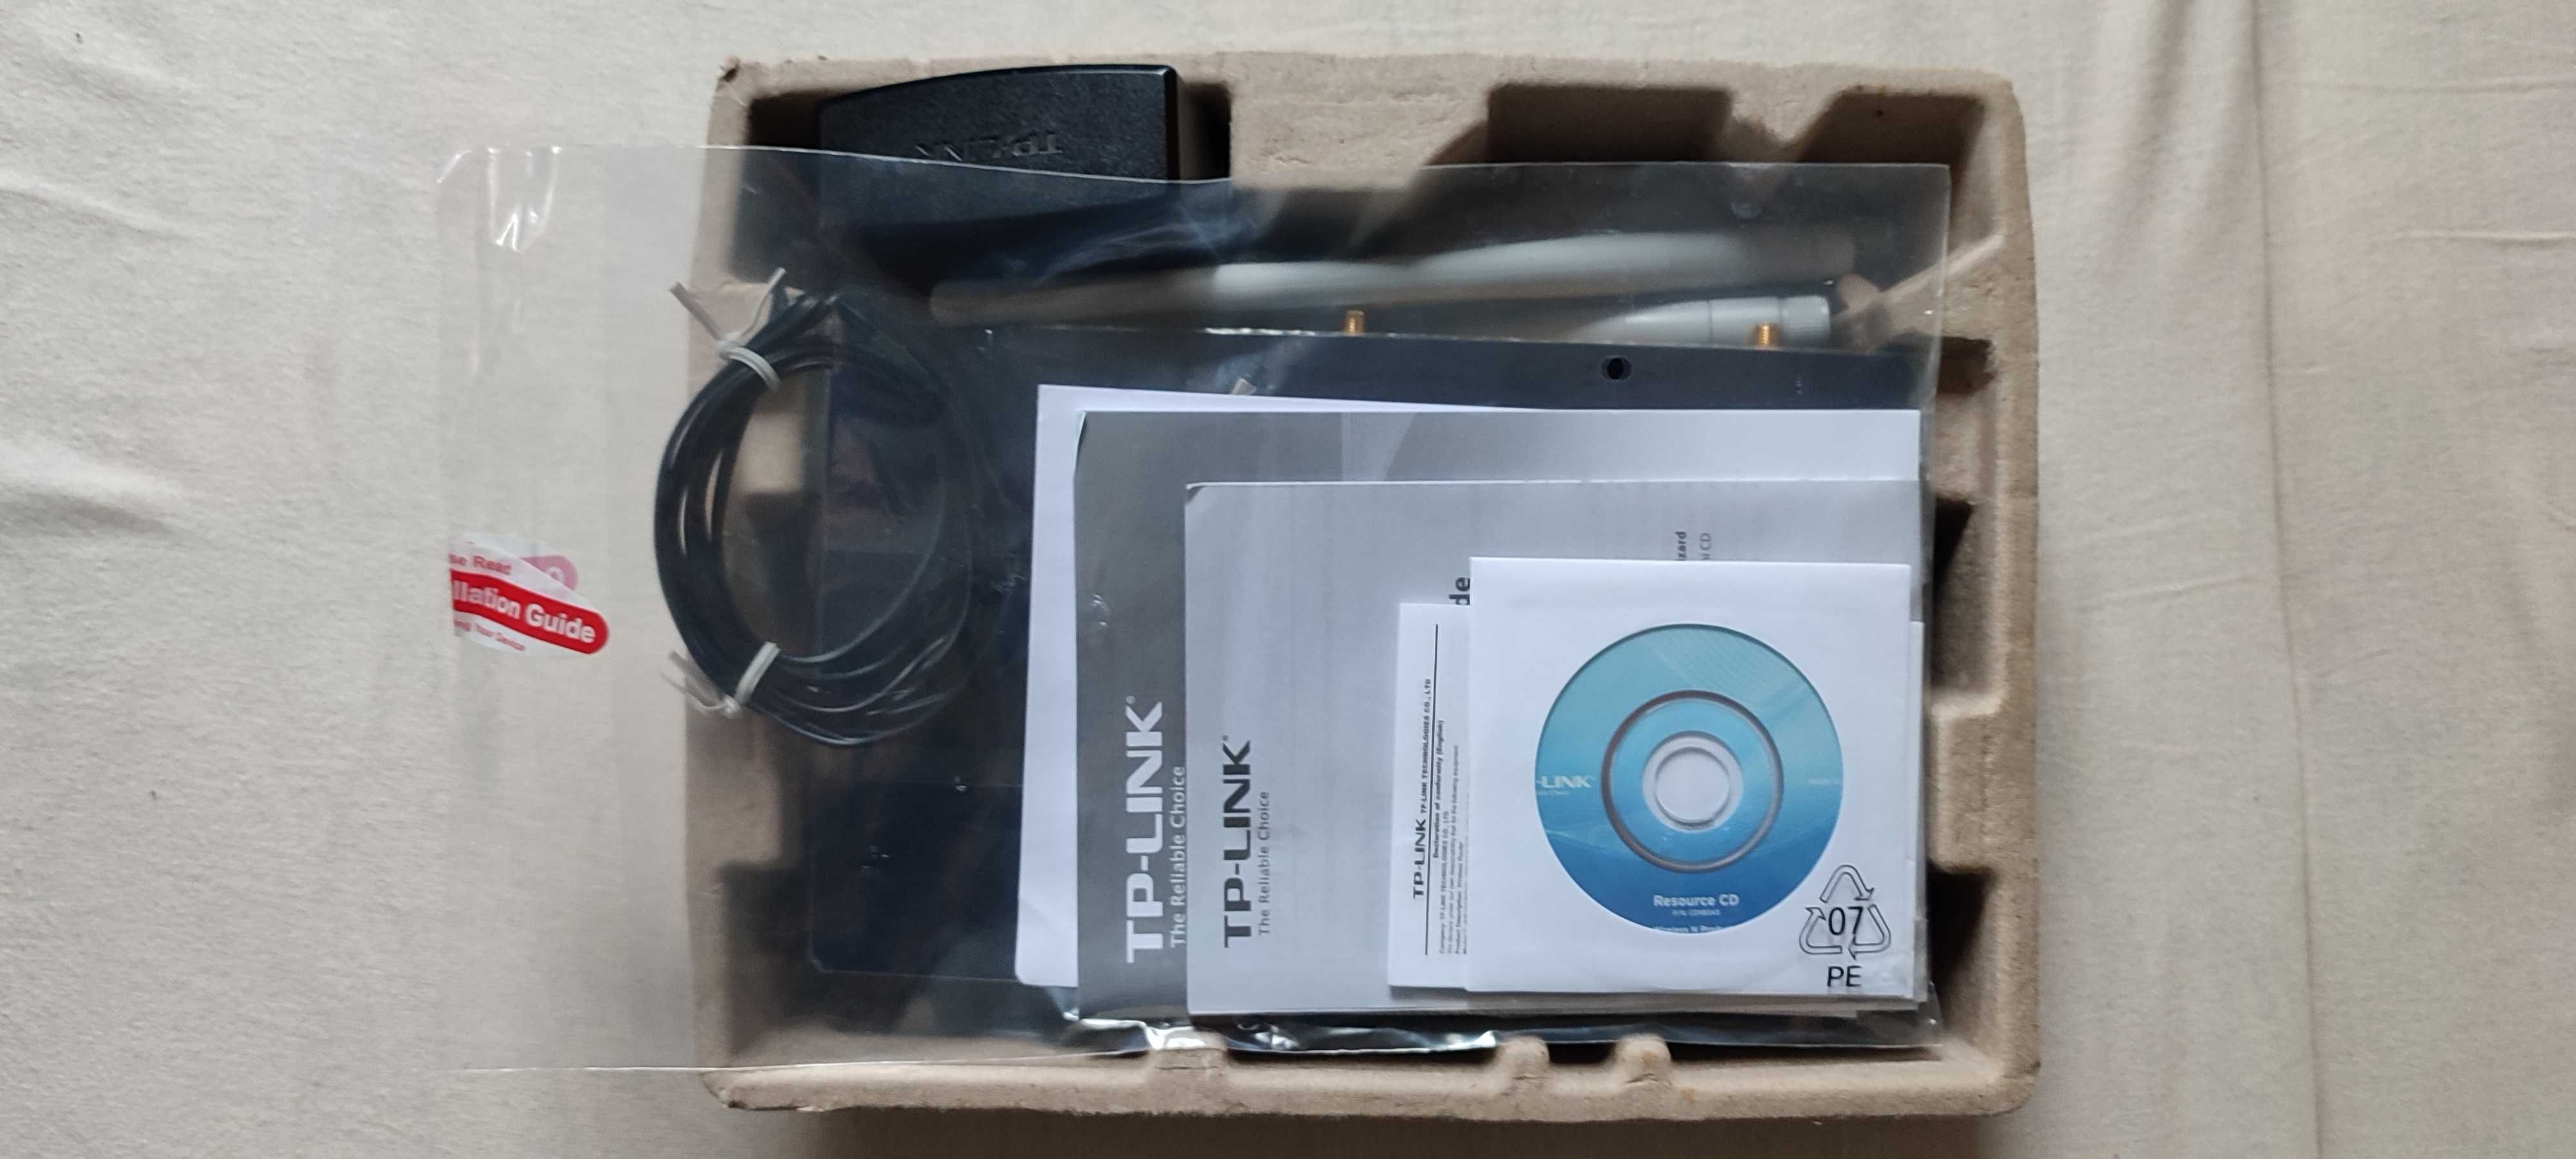 Router TP-LINK Model No. TL-WR1043ND